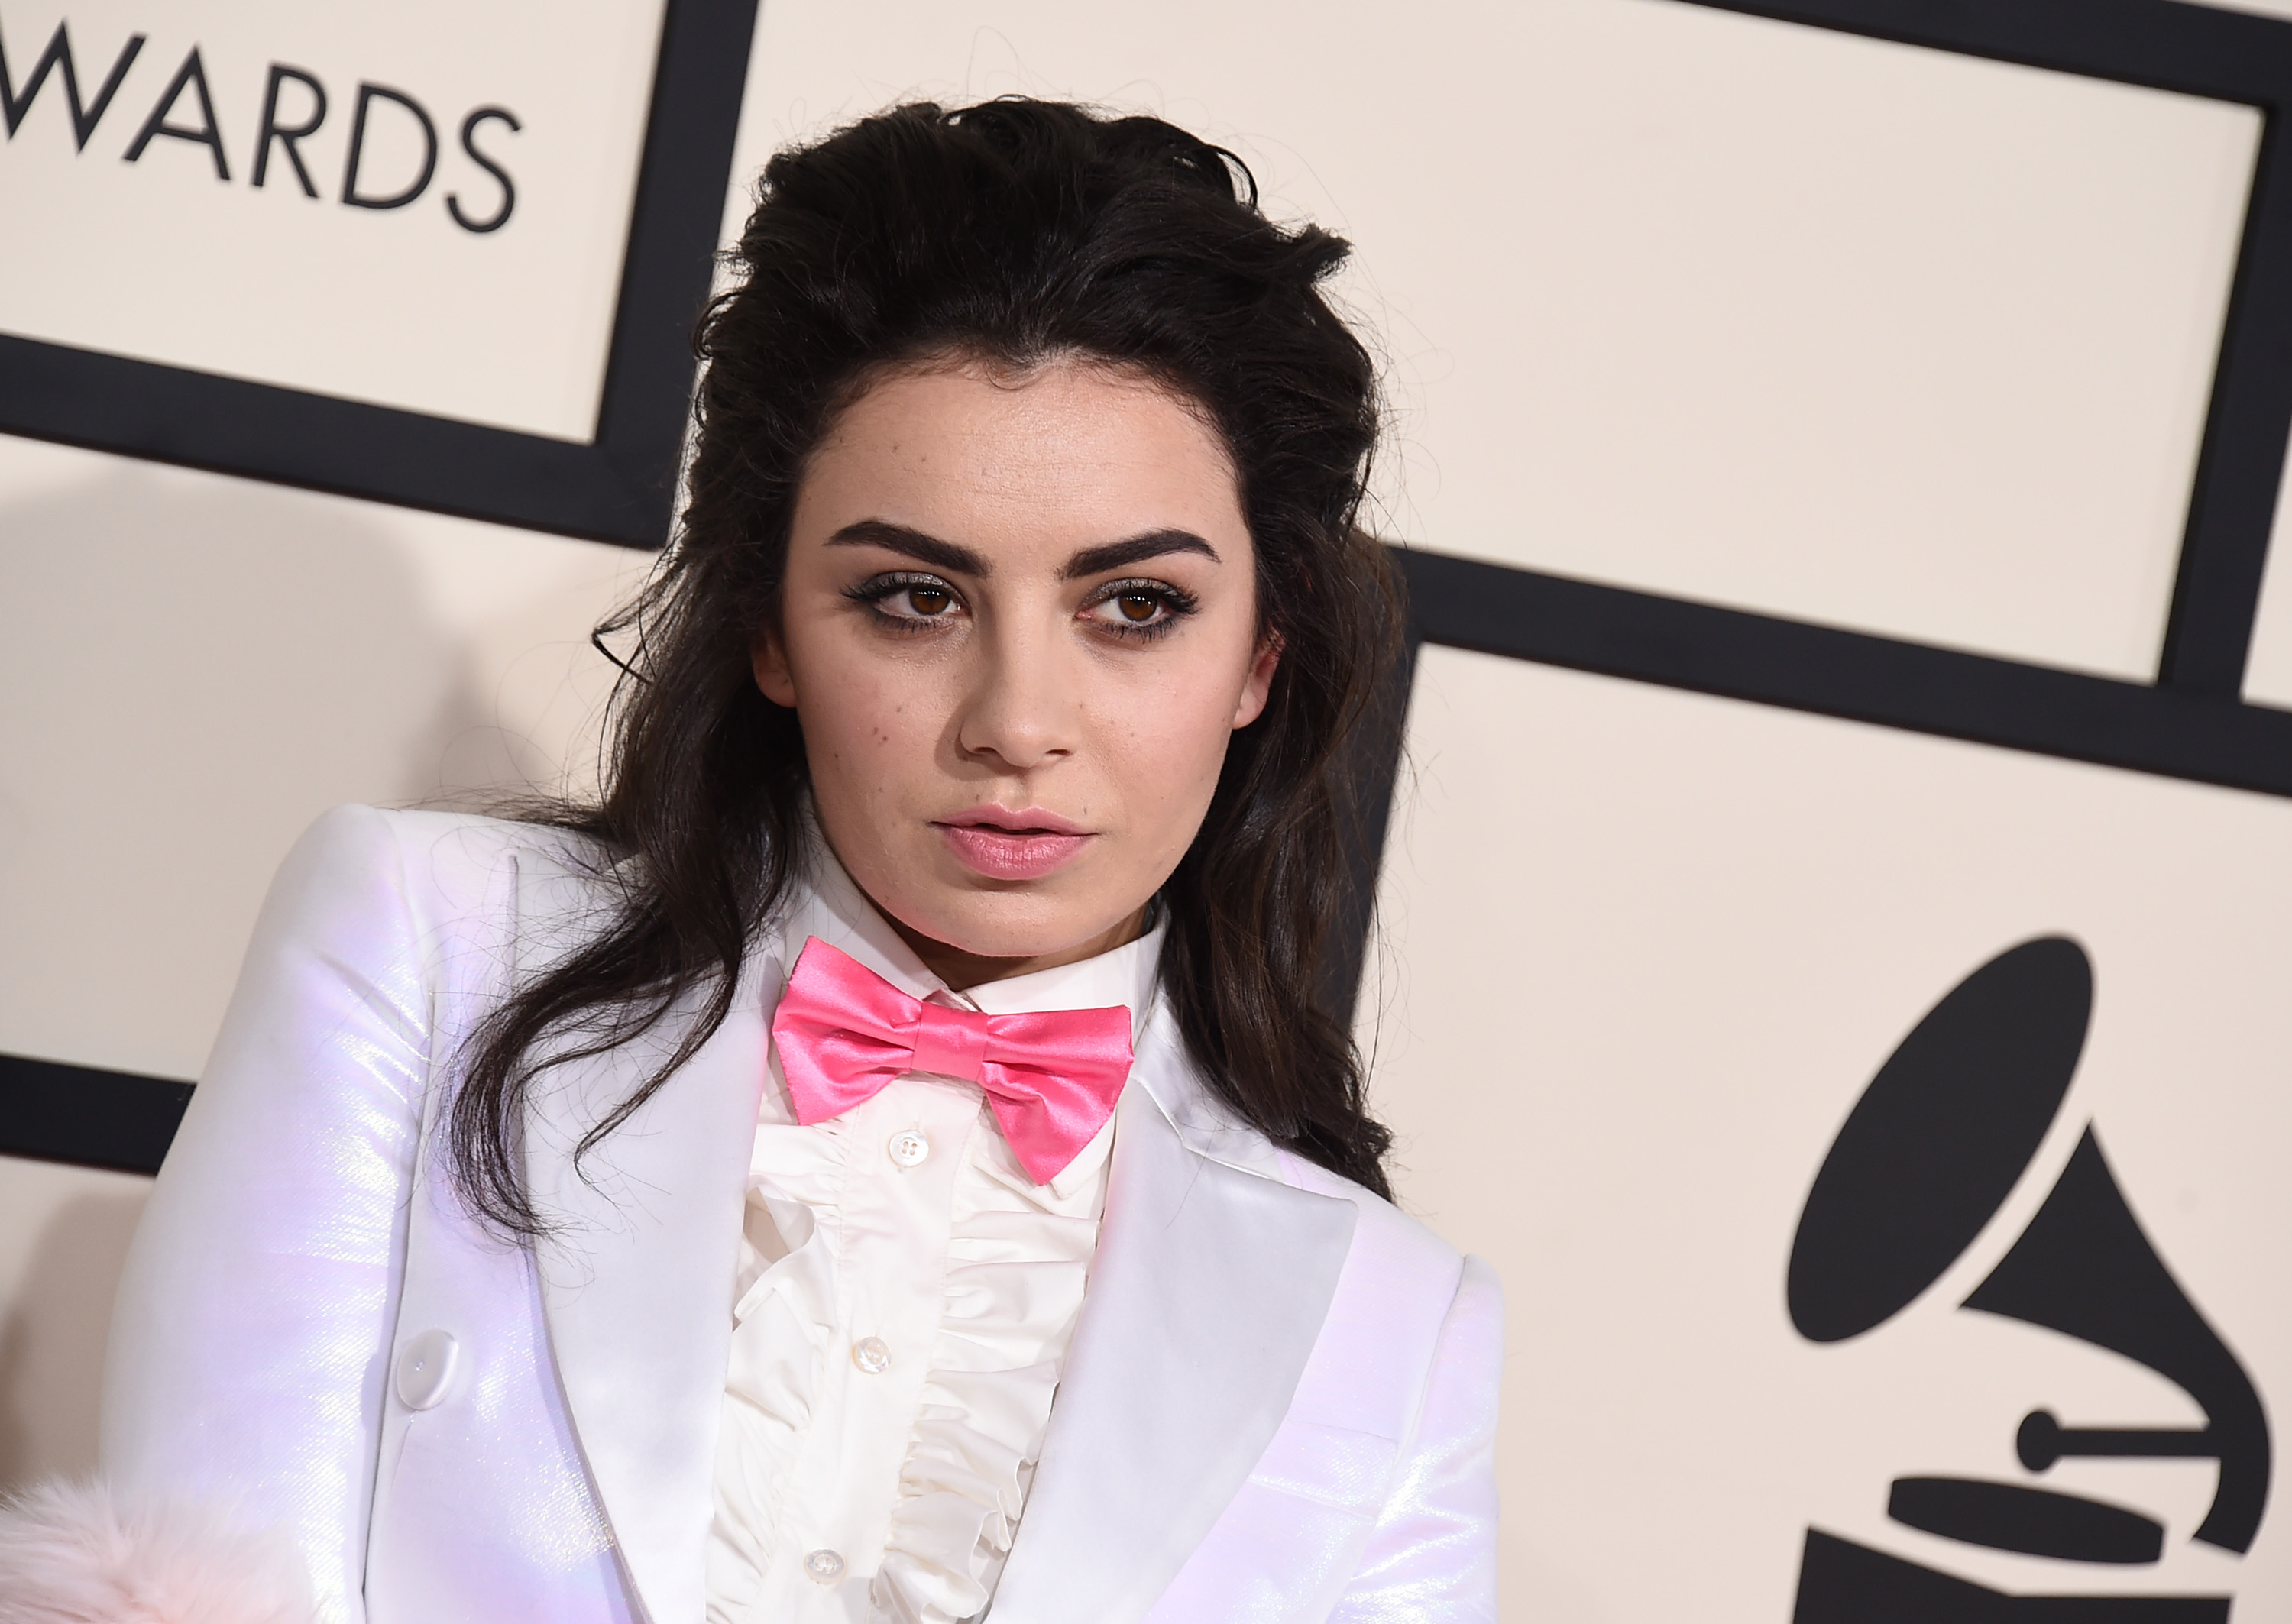 Charli XCX arrives at the 57th annual Grammy Awards at the Staples Center on Sunday, Feb. 8, 2015, in Los Angeles. (Photo by Jordan Strauss/Invision/AP)